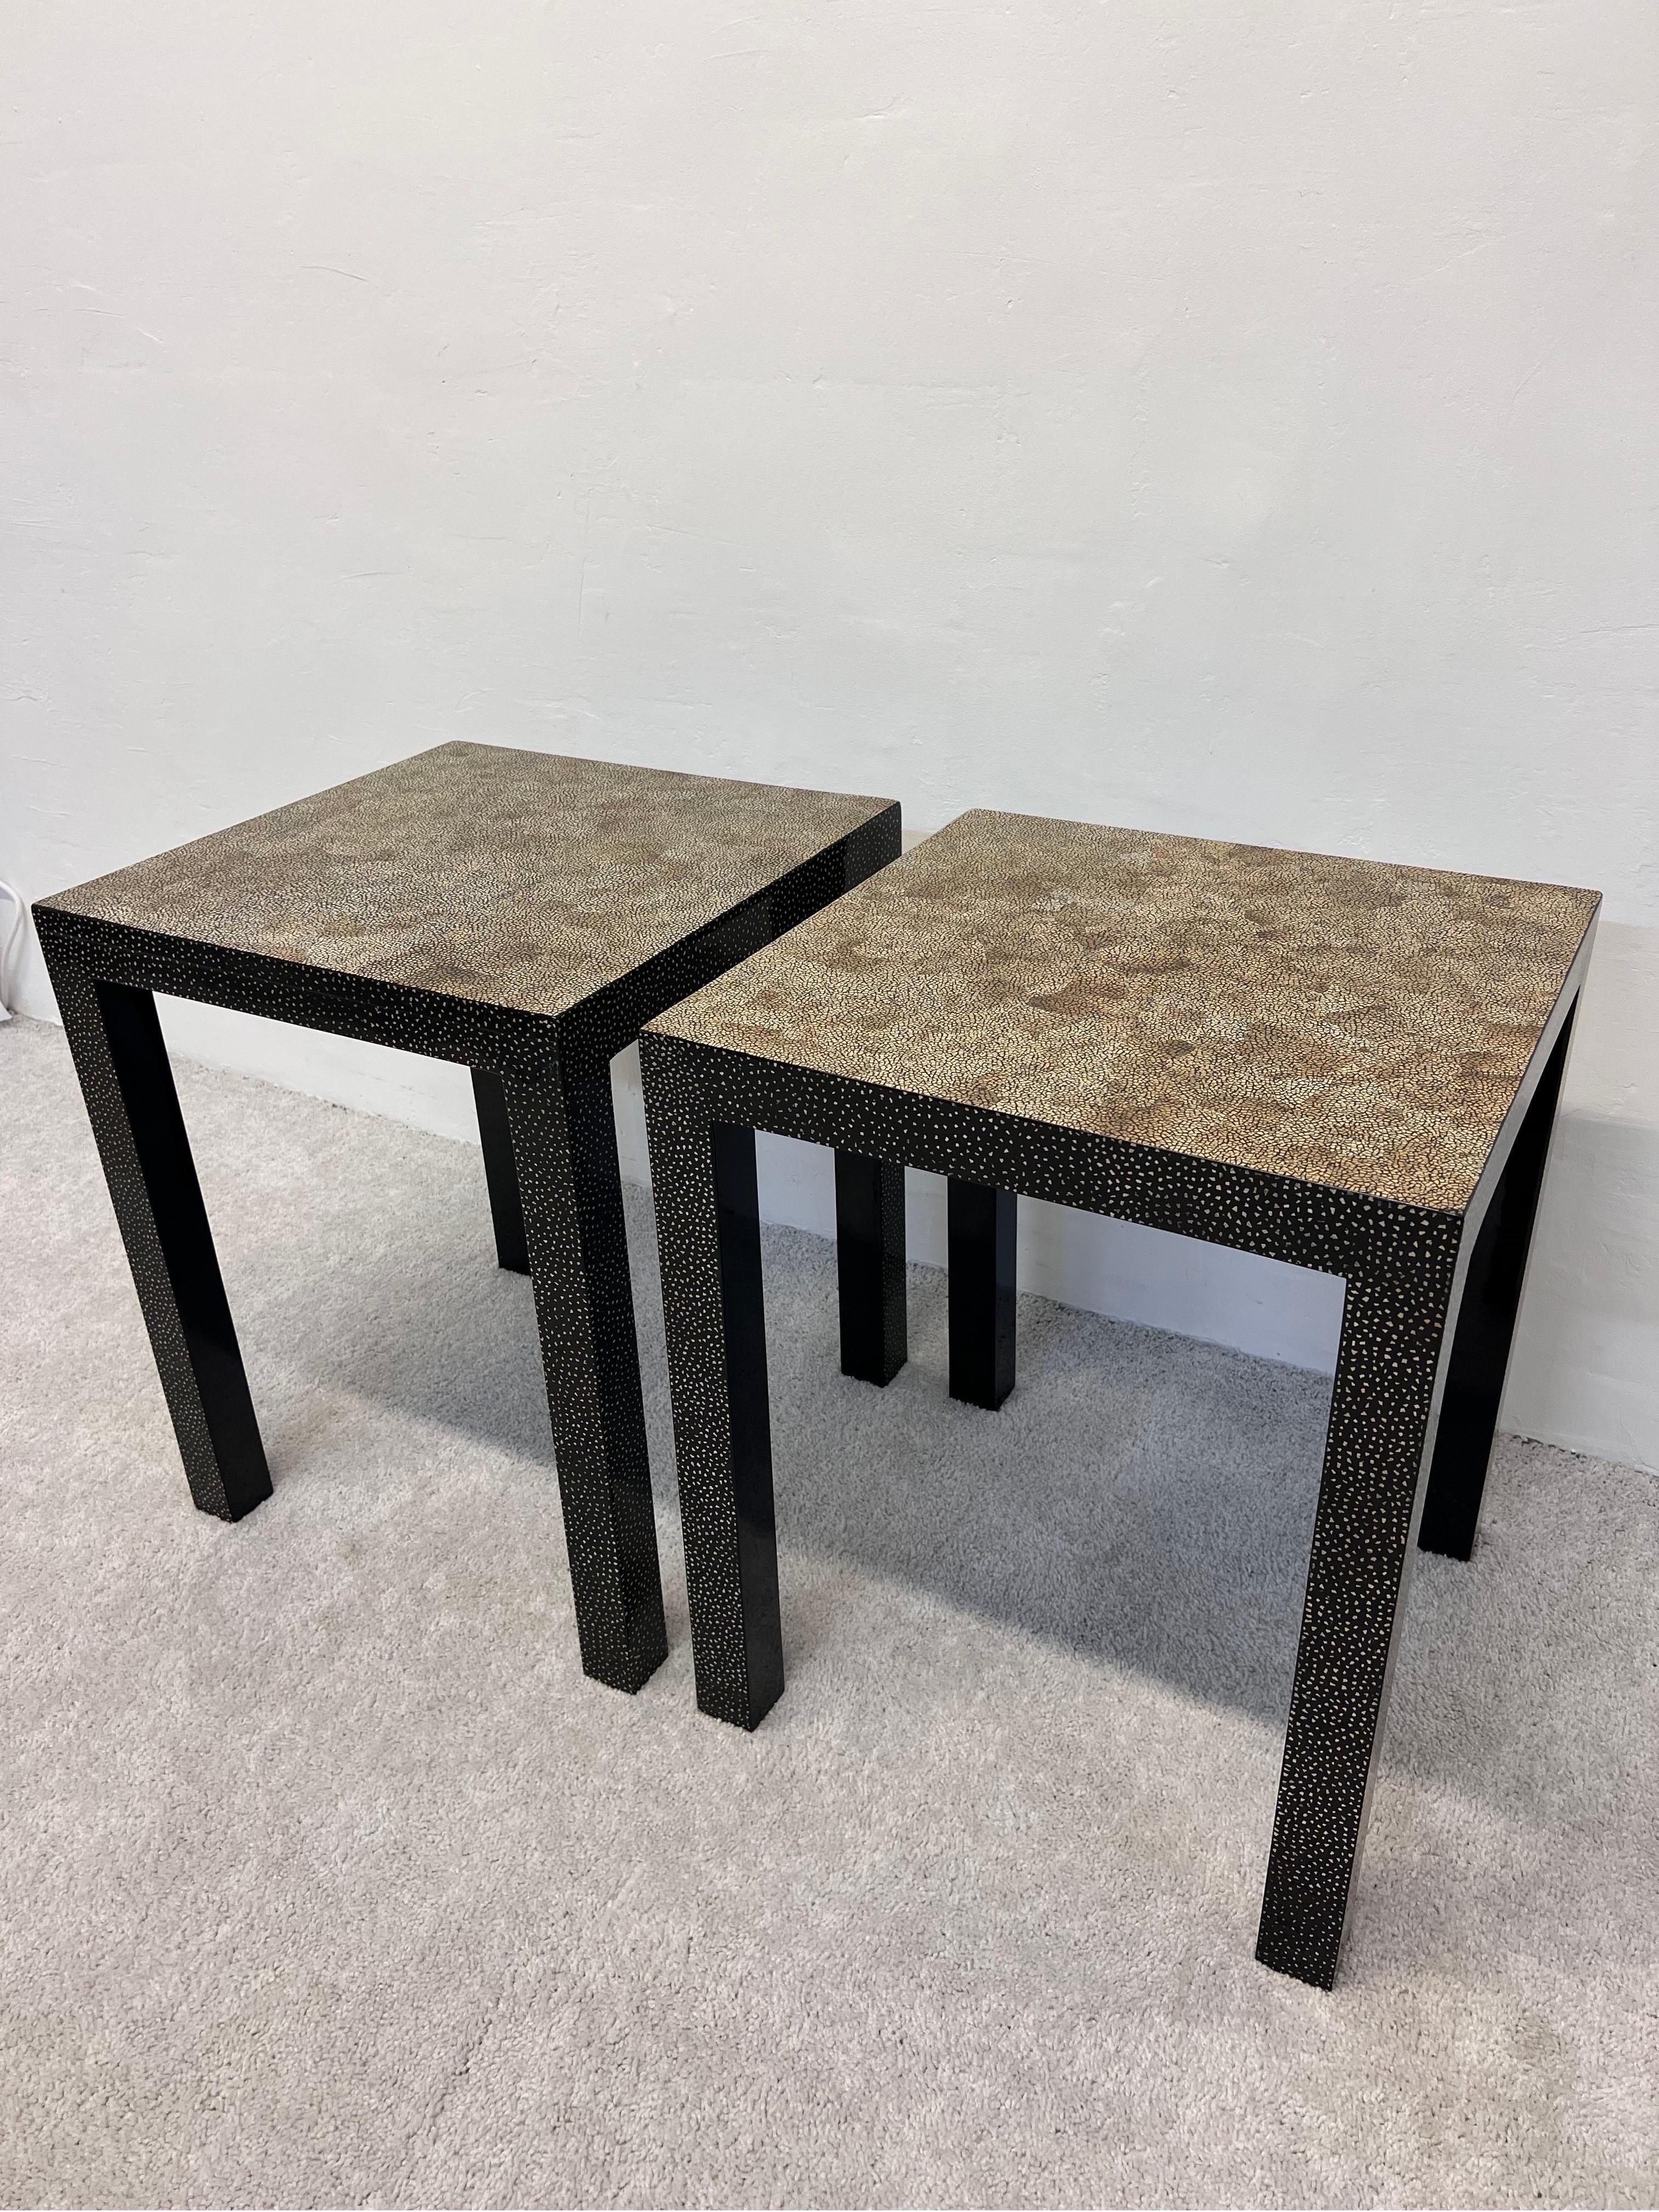 Philippine Contemporary Cracked Eggshell Parsons Side Tables by Palecek, 1990s, a Pair